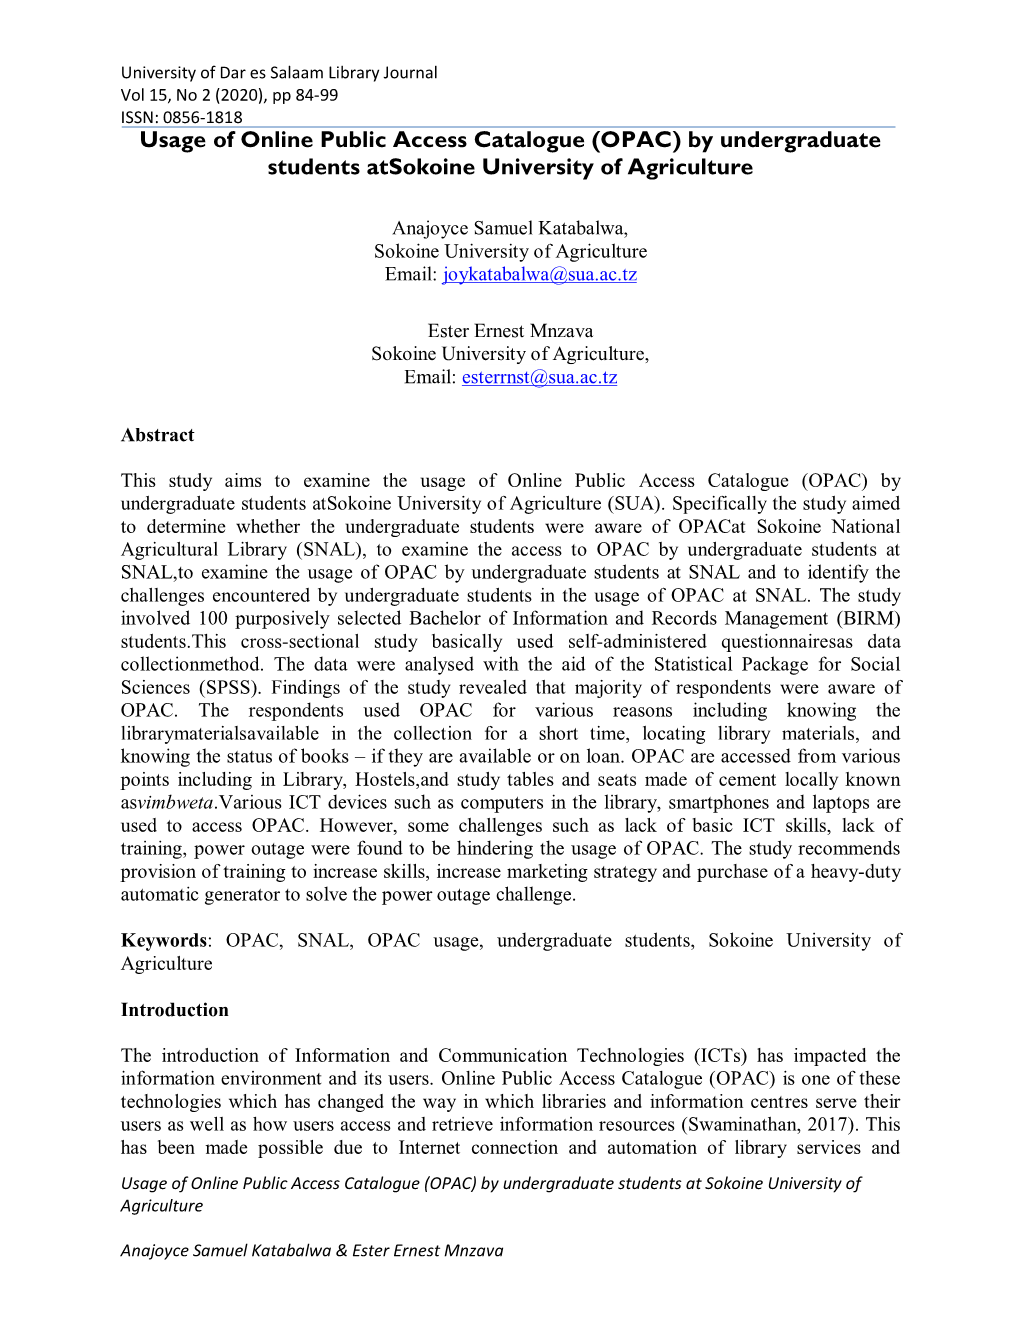 (OPAC) by Undergraduate Students Atsokoine University of Agriculture